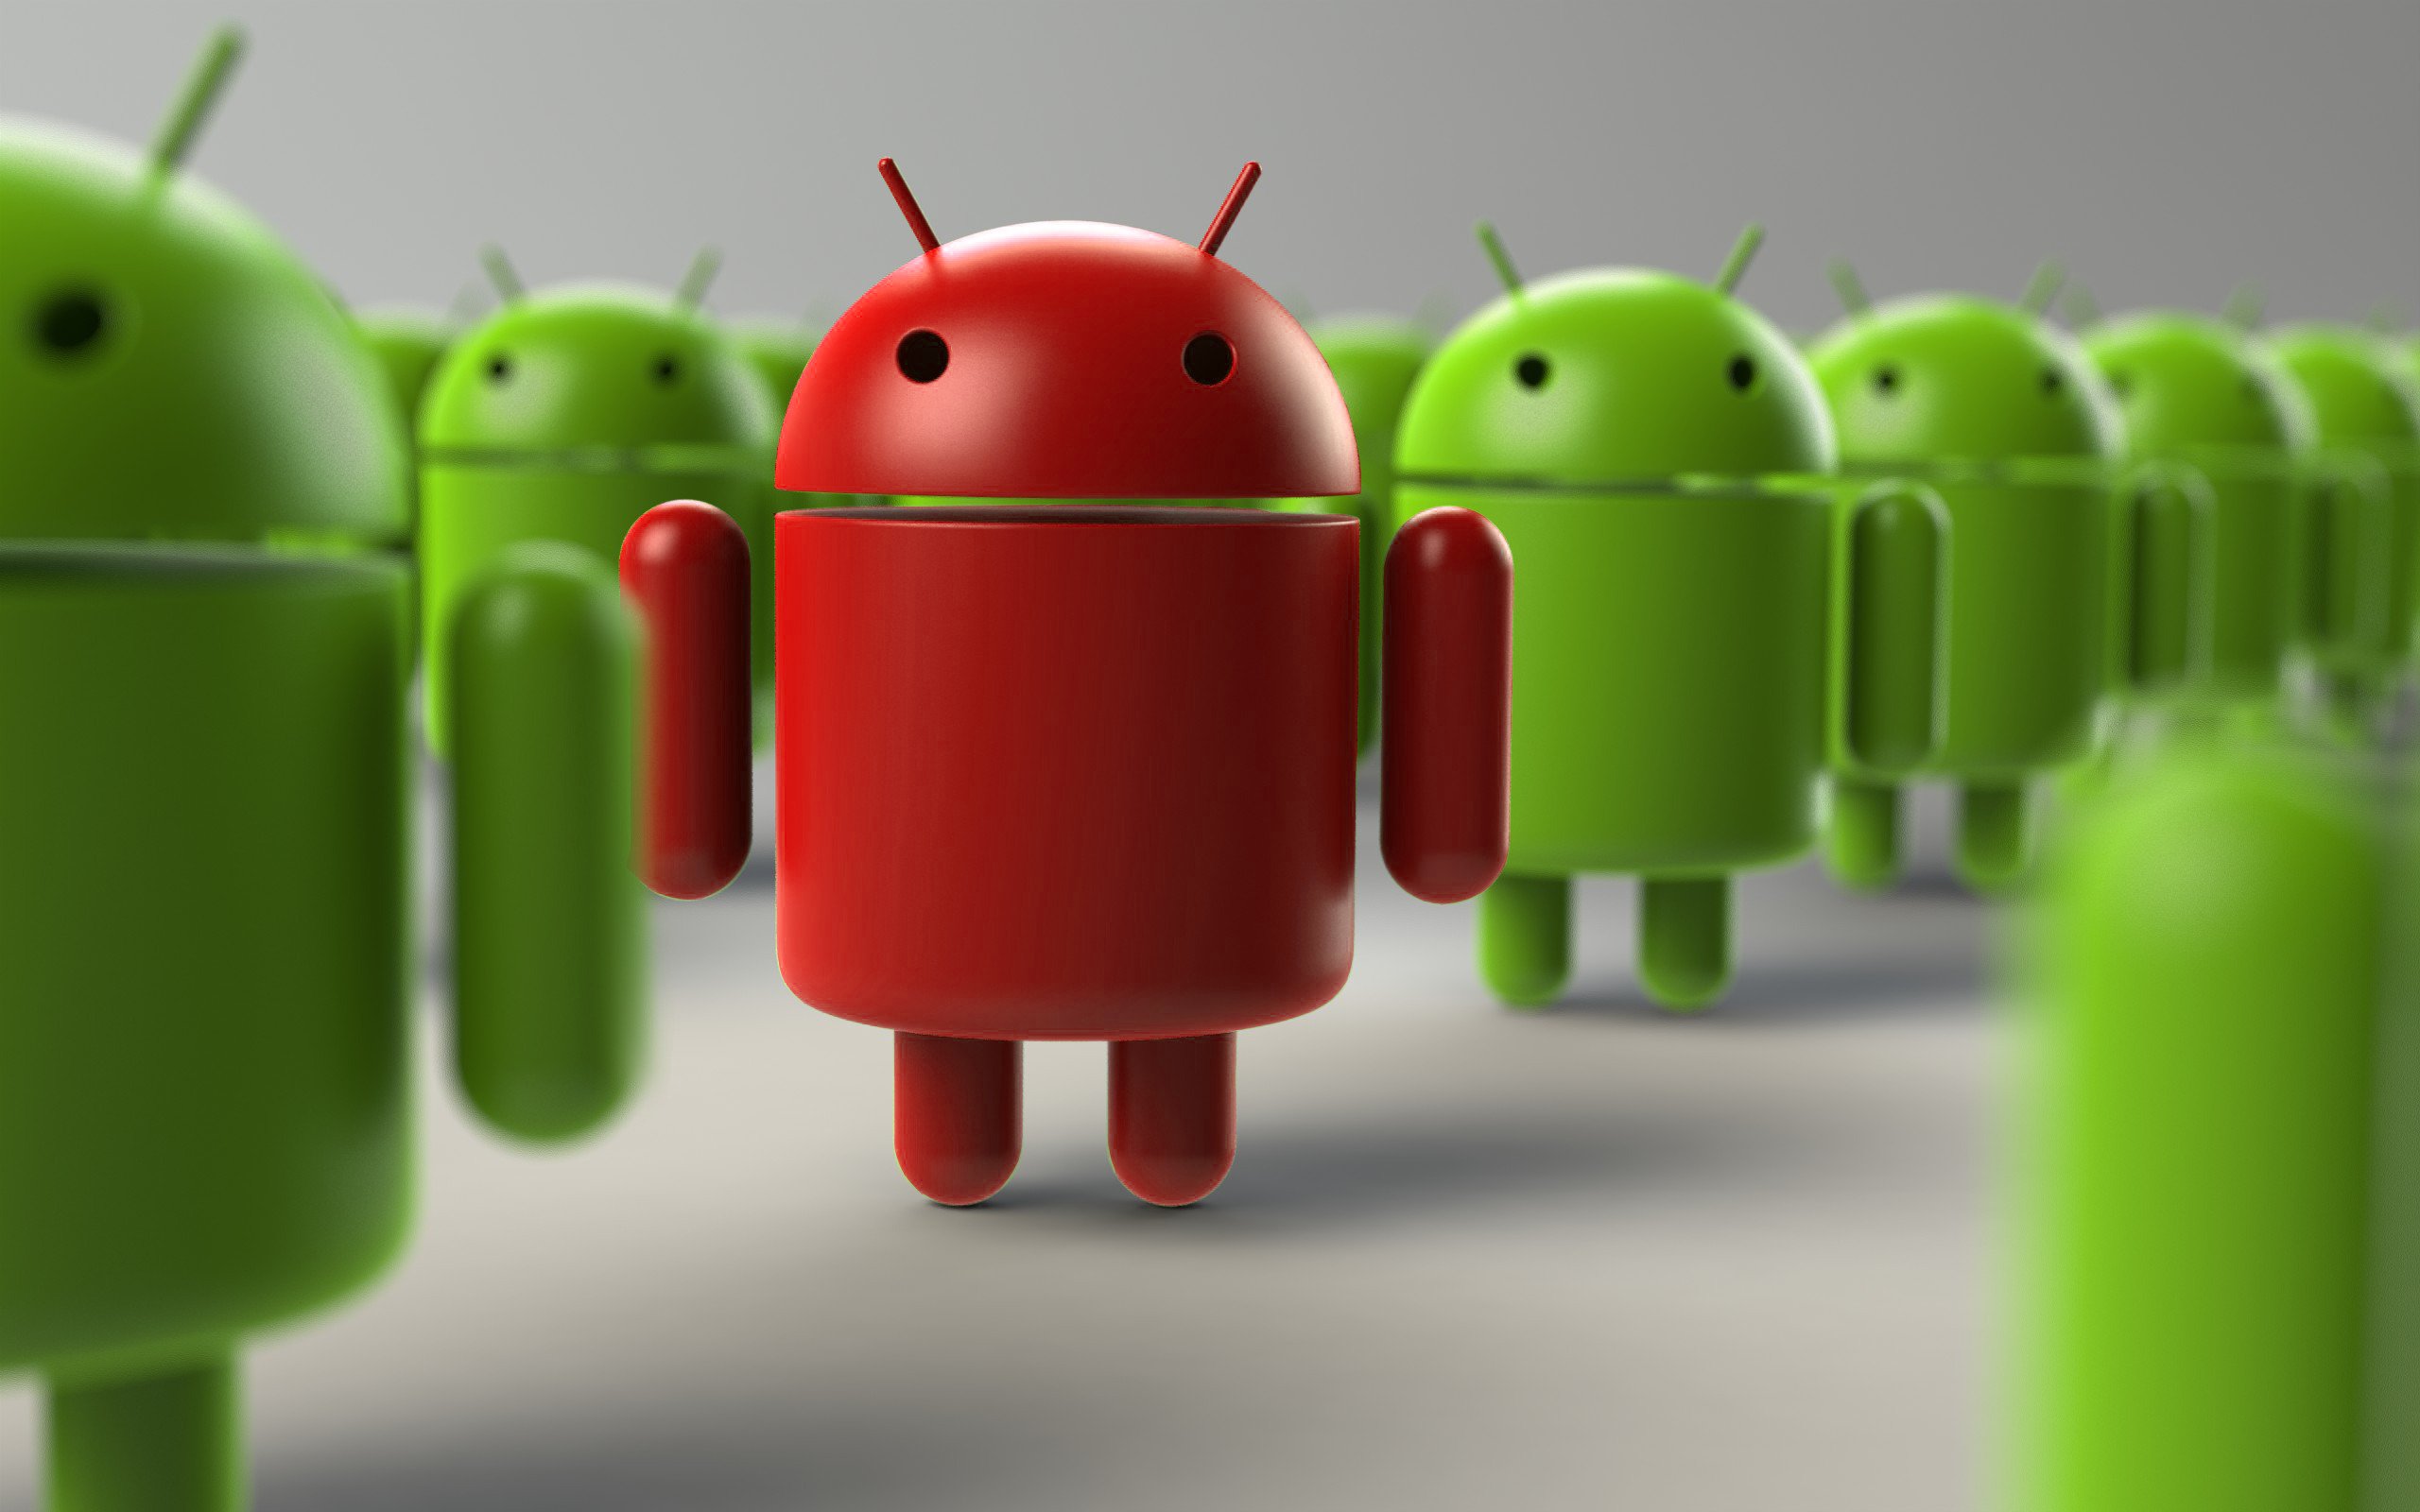 6 important features Android users will get soon